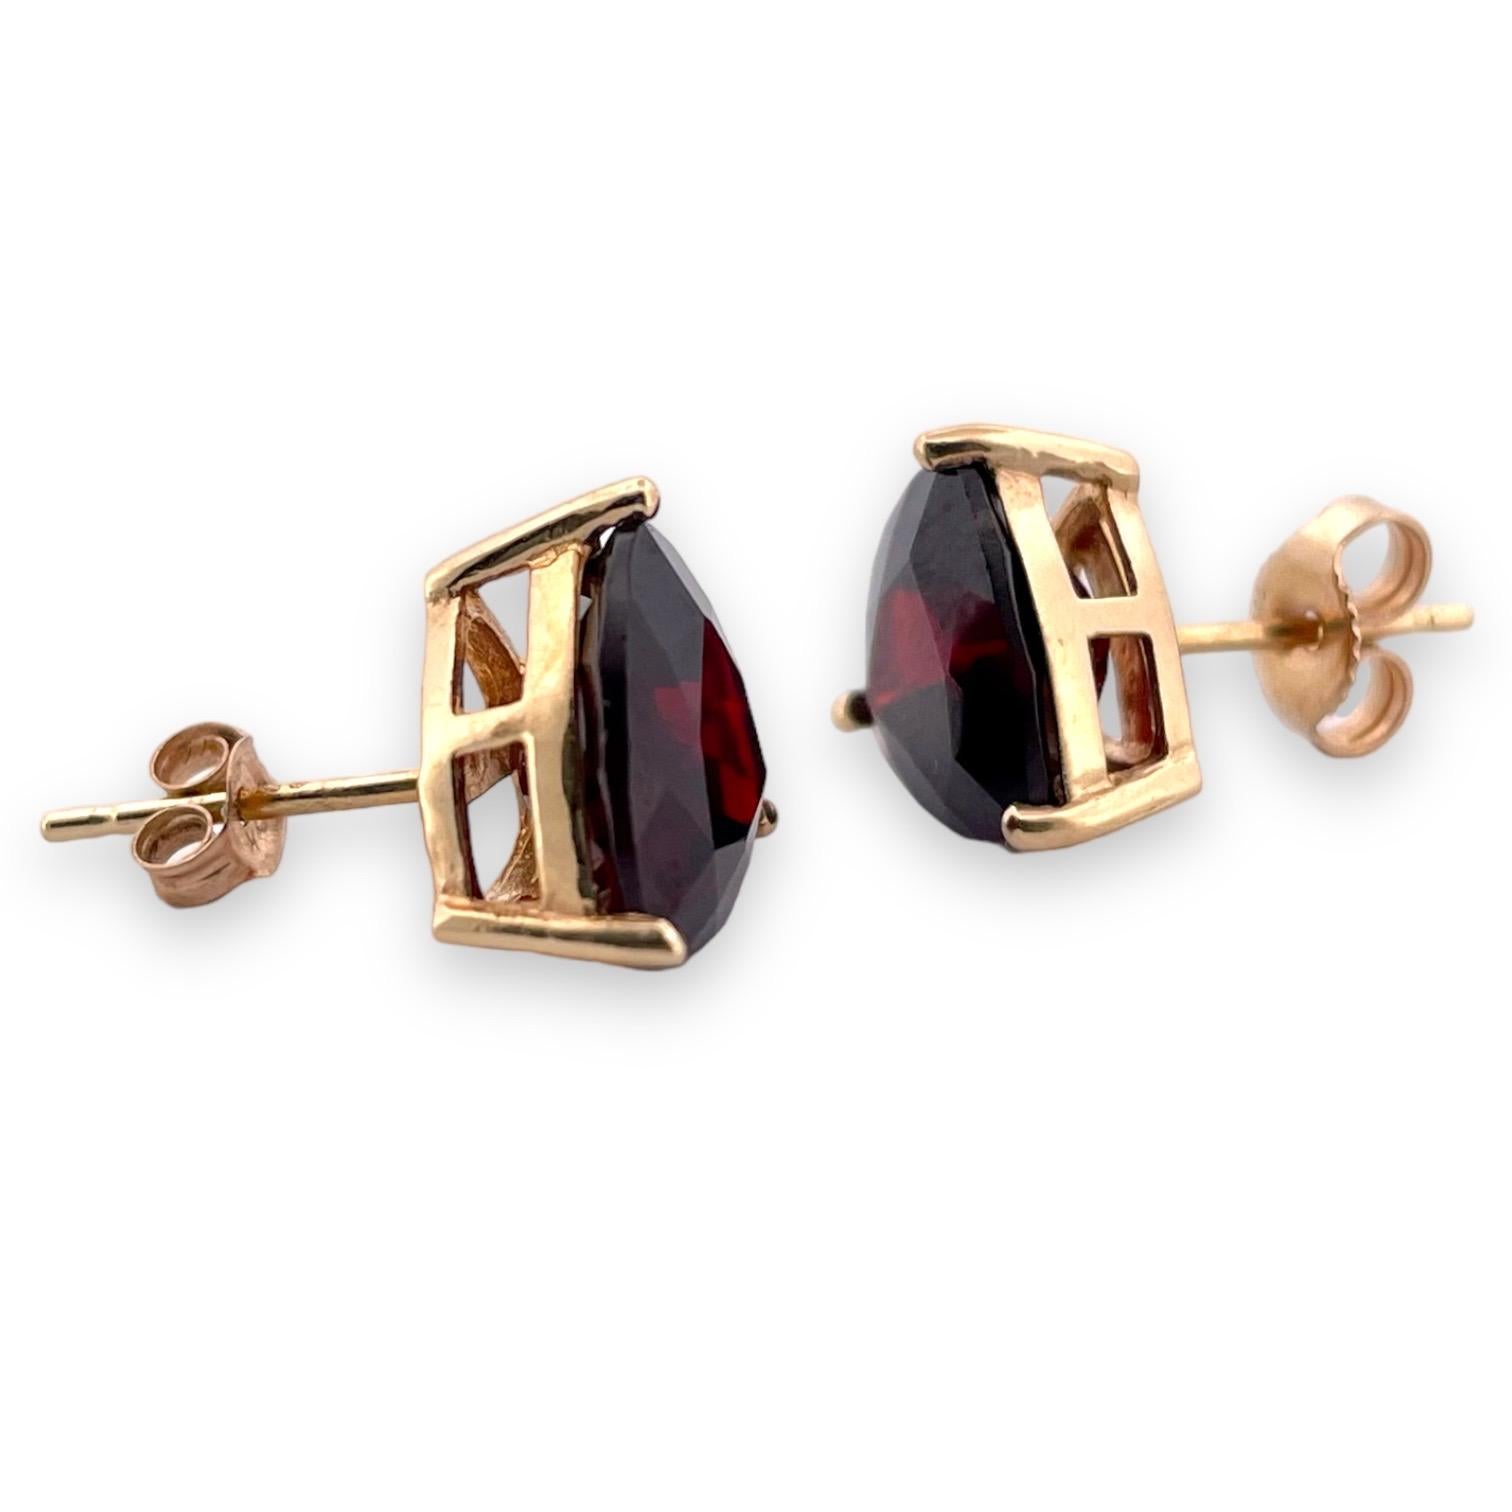 Exude confidence and grace with our Triumphant Trillion-Cut Garnet Stud Earrings, flawlessly set in the rich luster of 14K yellow gold. These studs celebrate the allure of the garnet, a gemstone revered for its deep red wine hues and connection to